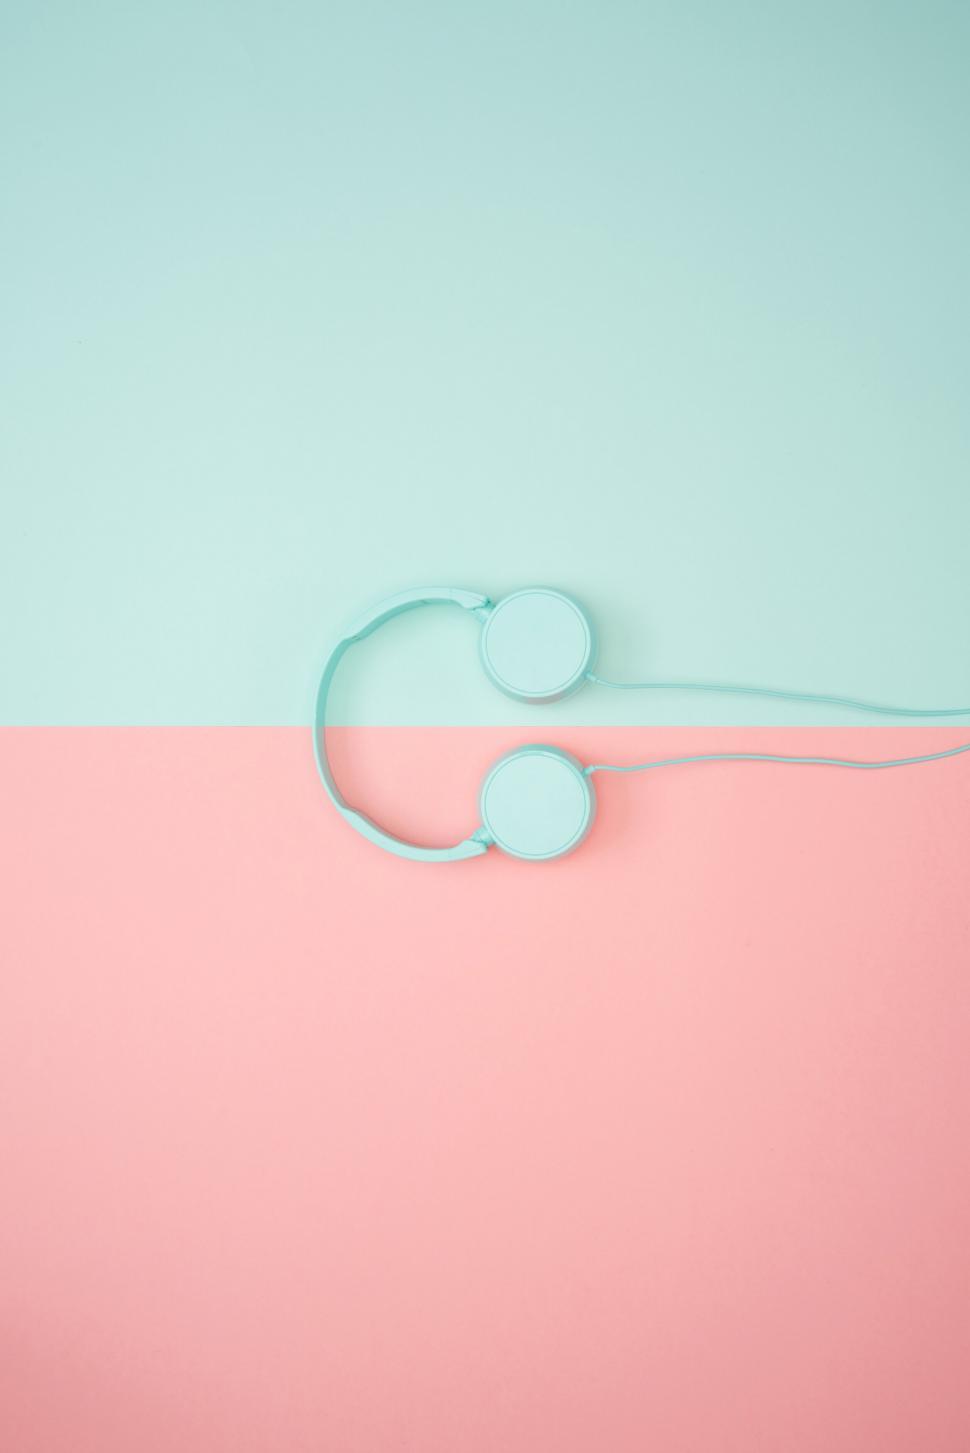 Free Image of Turquoise headphones on a pink and blue background 